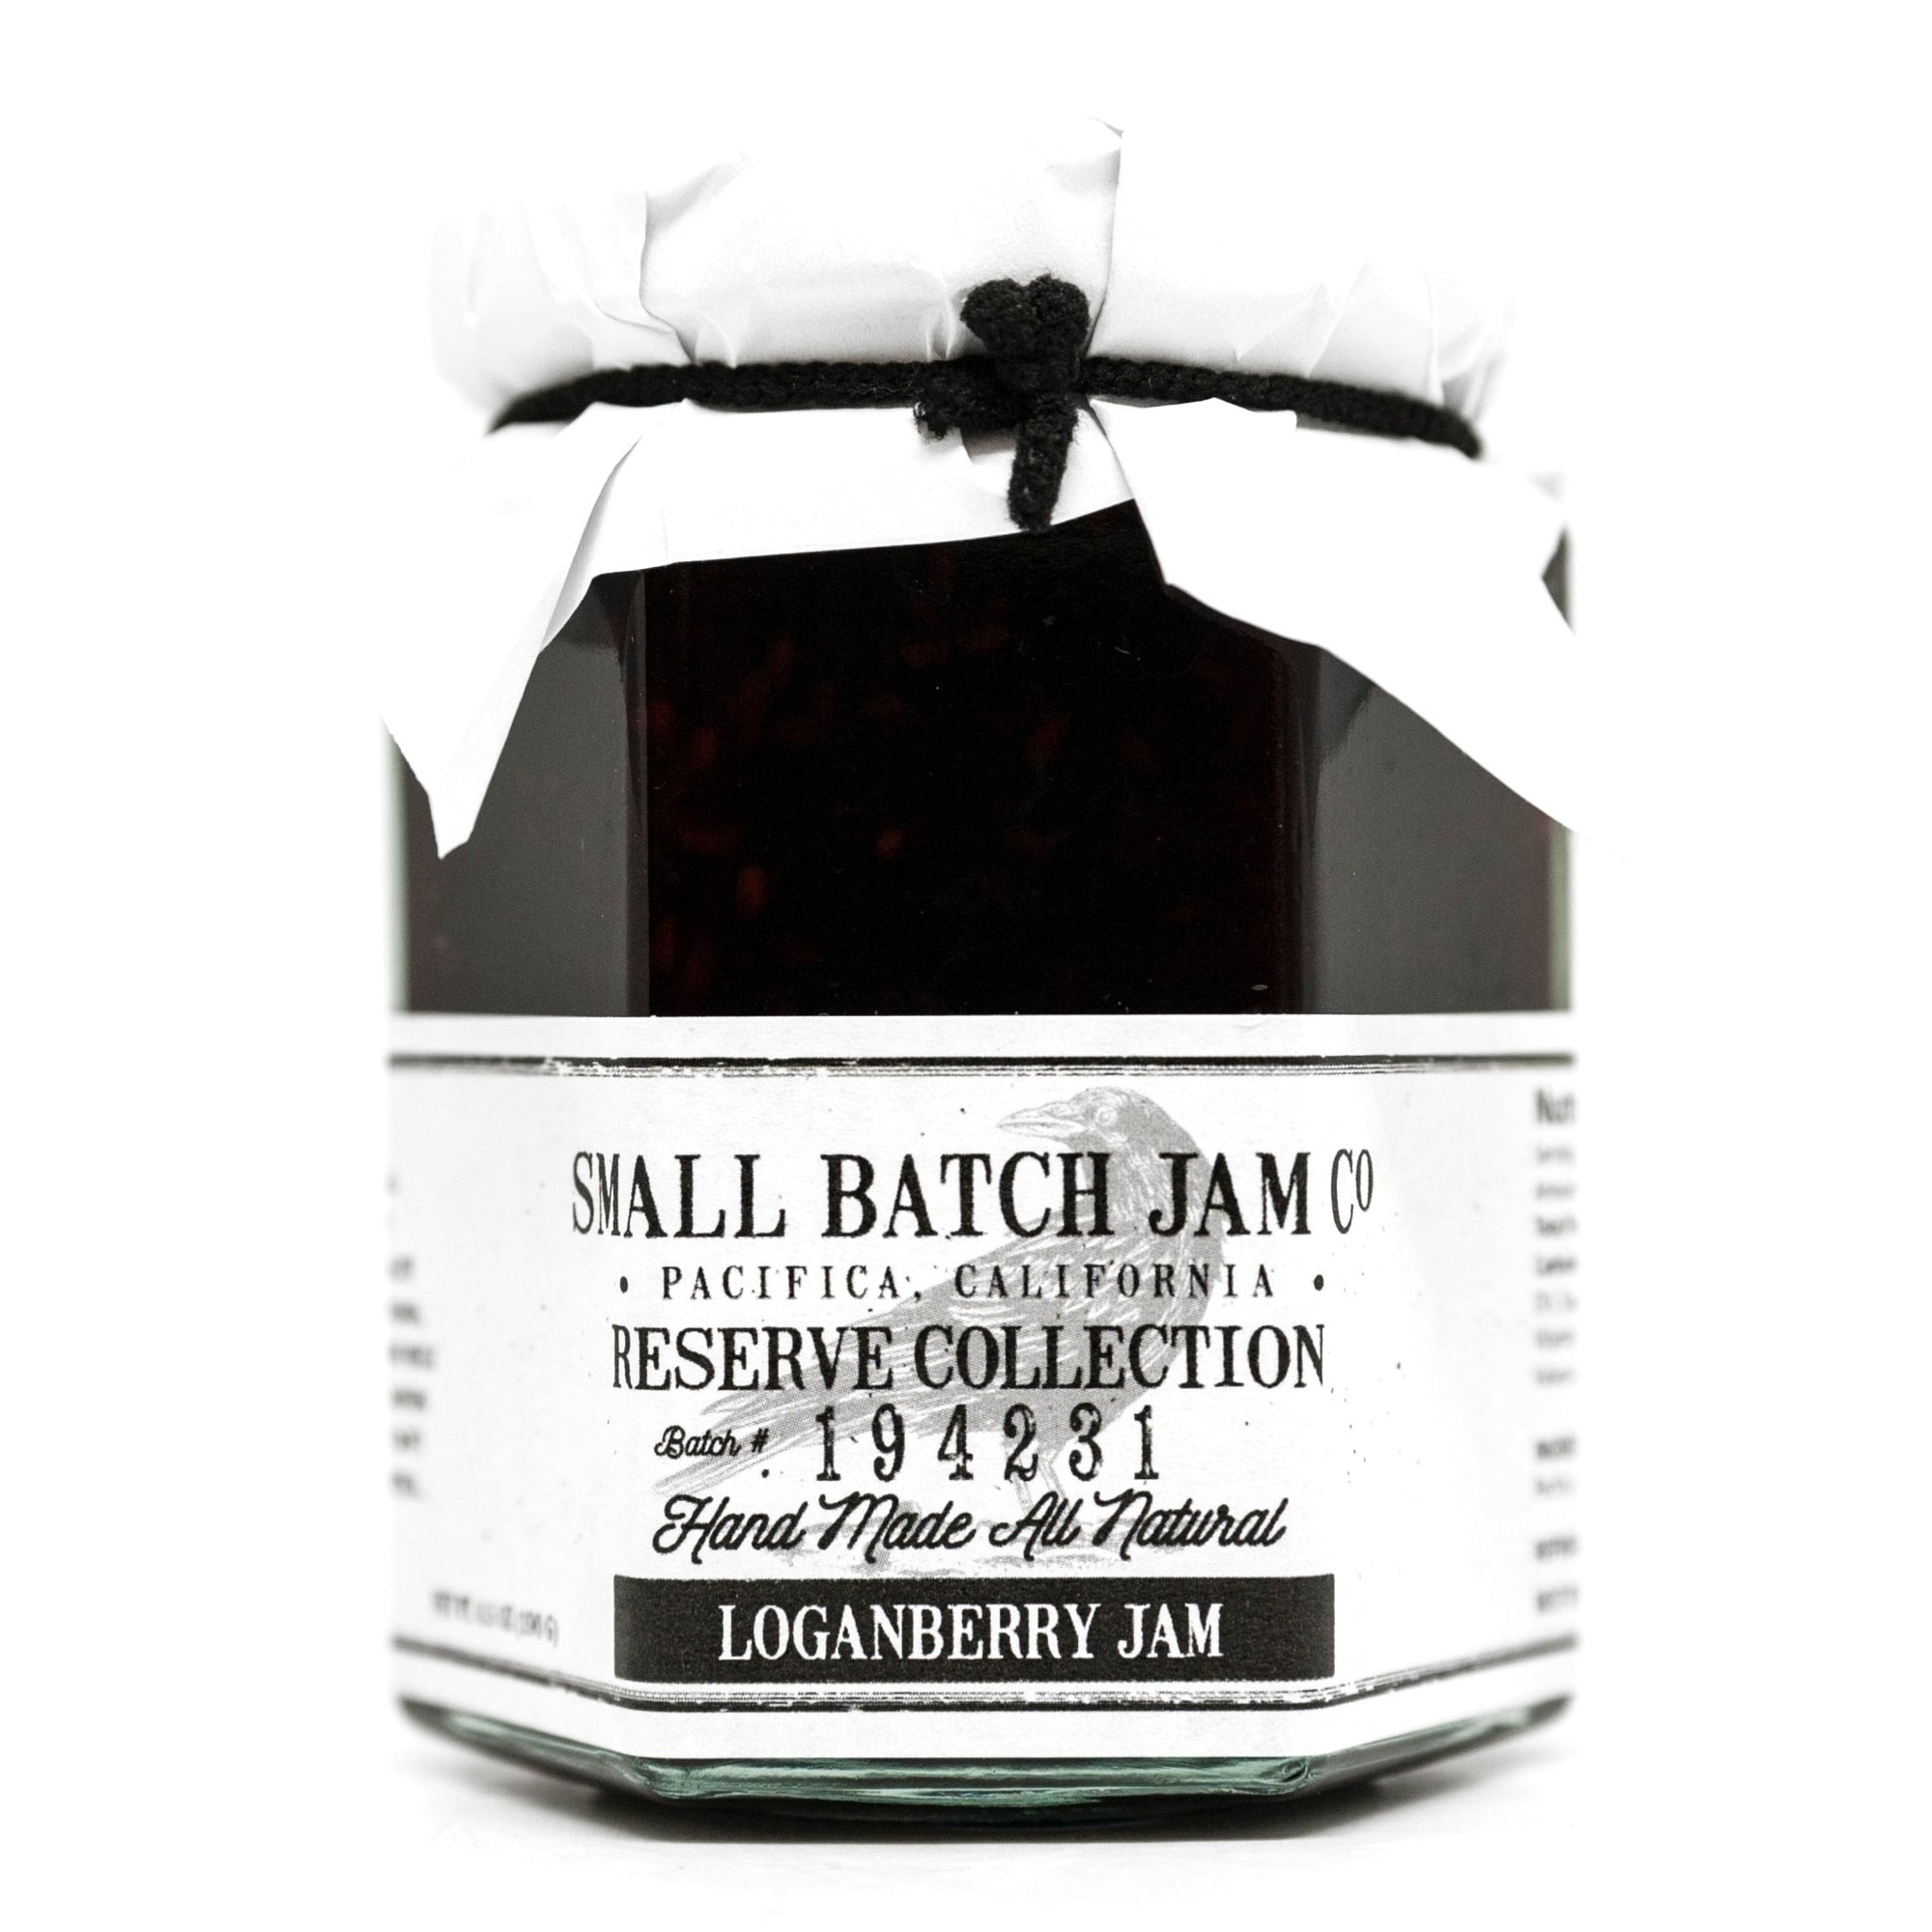 Loganberry Jam - Reserve Collection - Small Batch Jam Co